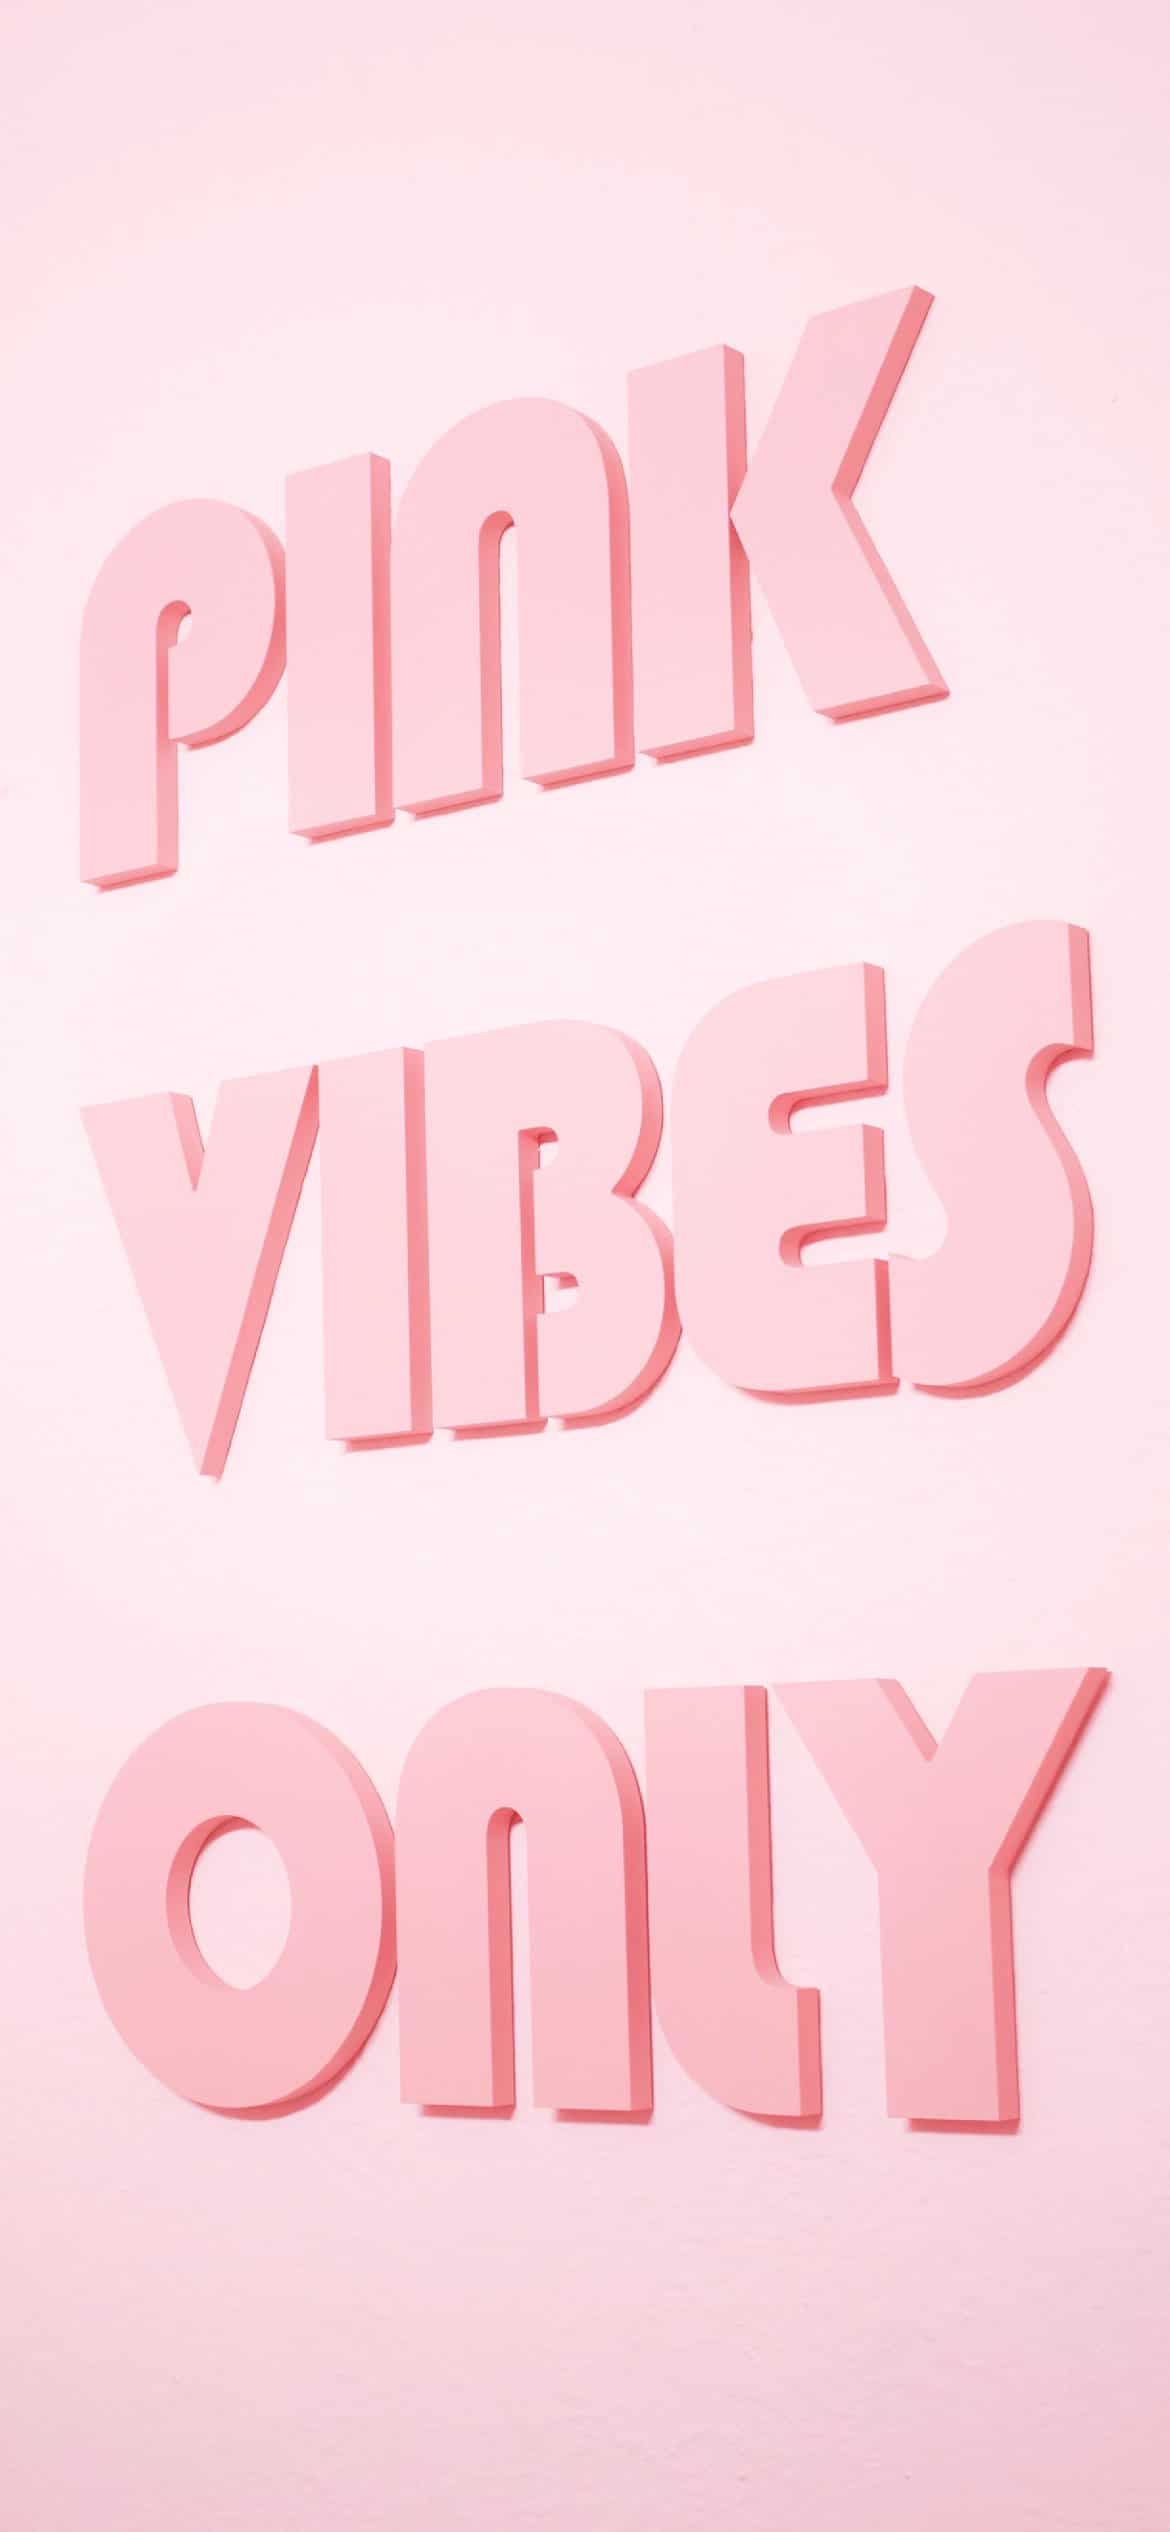 Pink Aesthetic Wallpaper Background You Need For Your Phone Right Now!